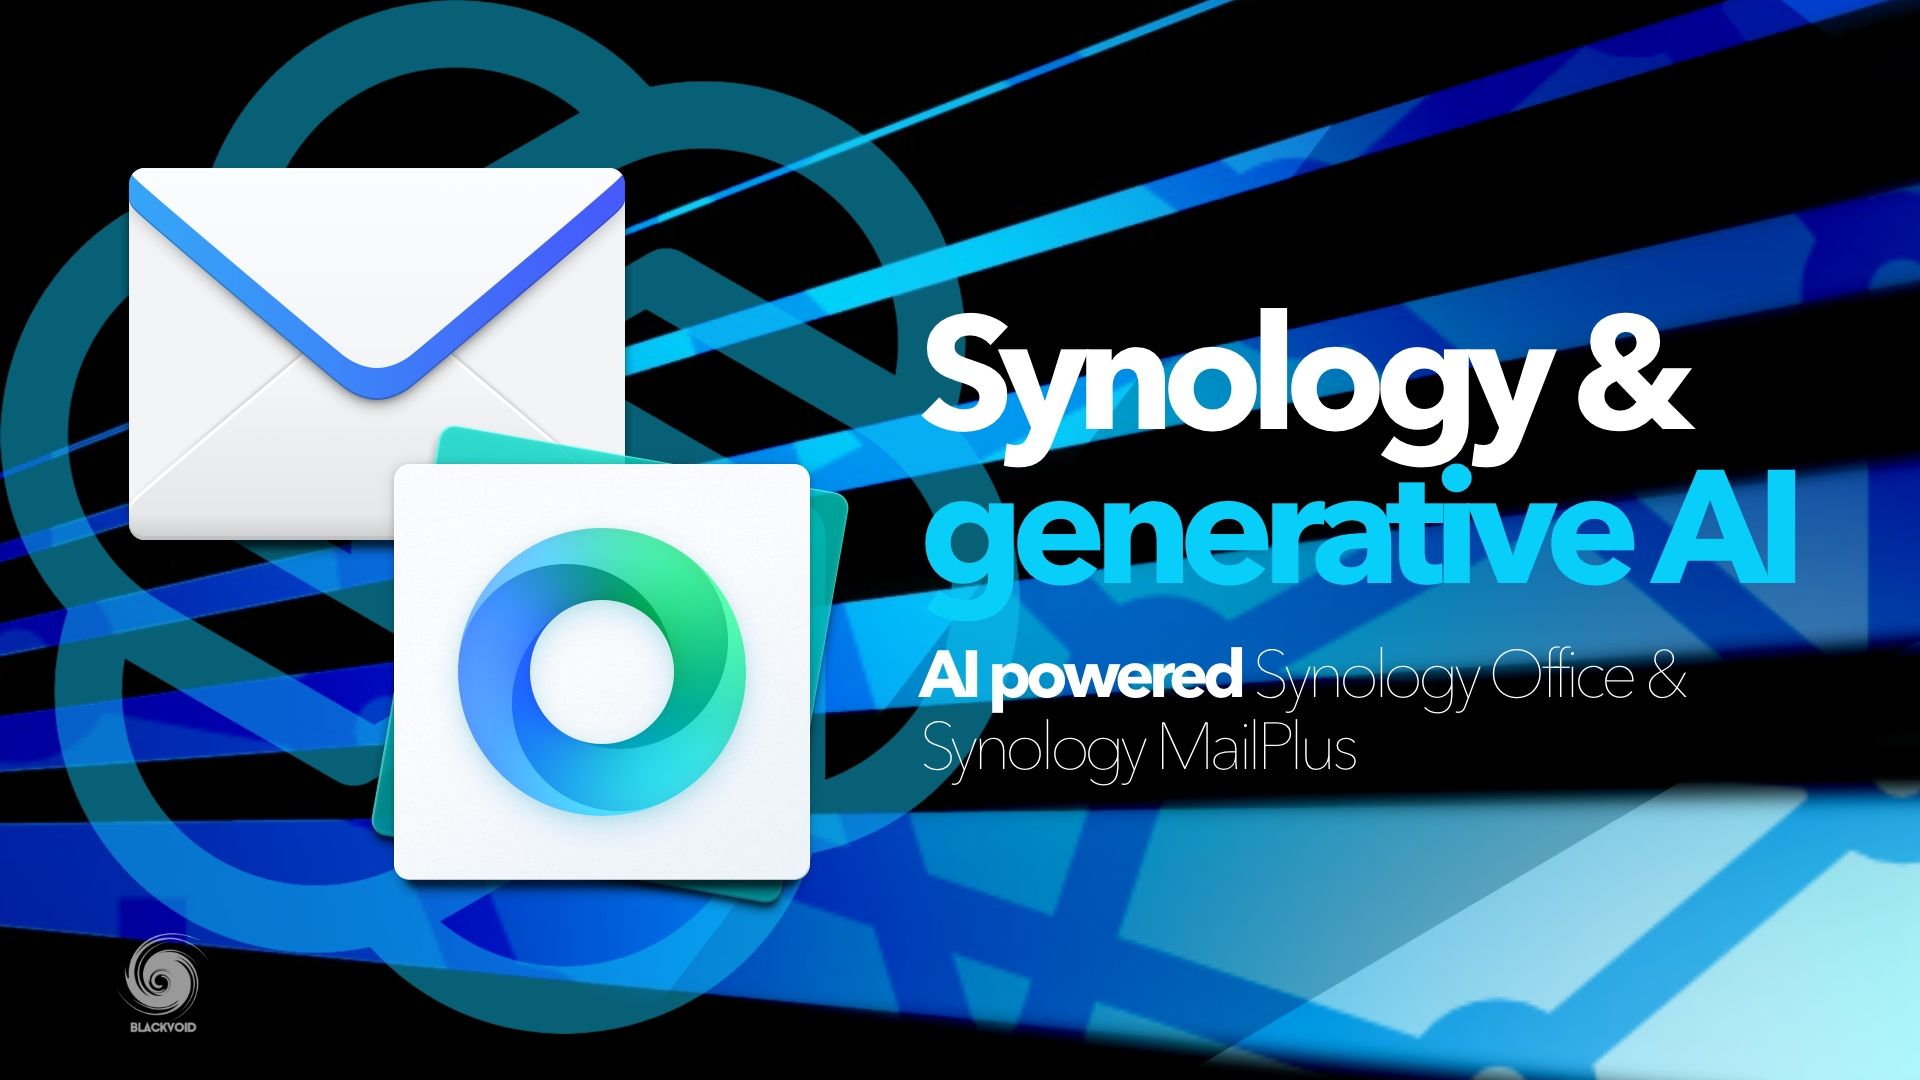 Synology & generative AI support in Synology Office and MailPlus